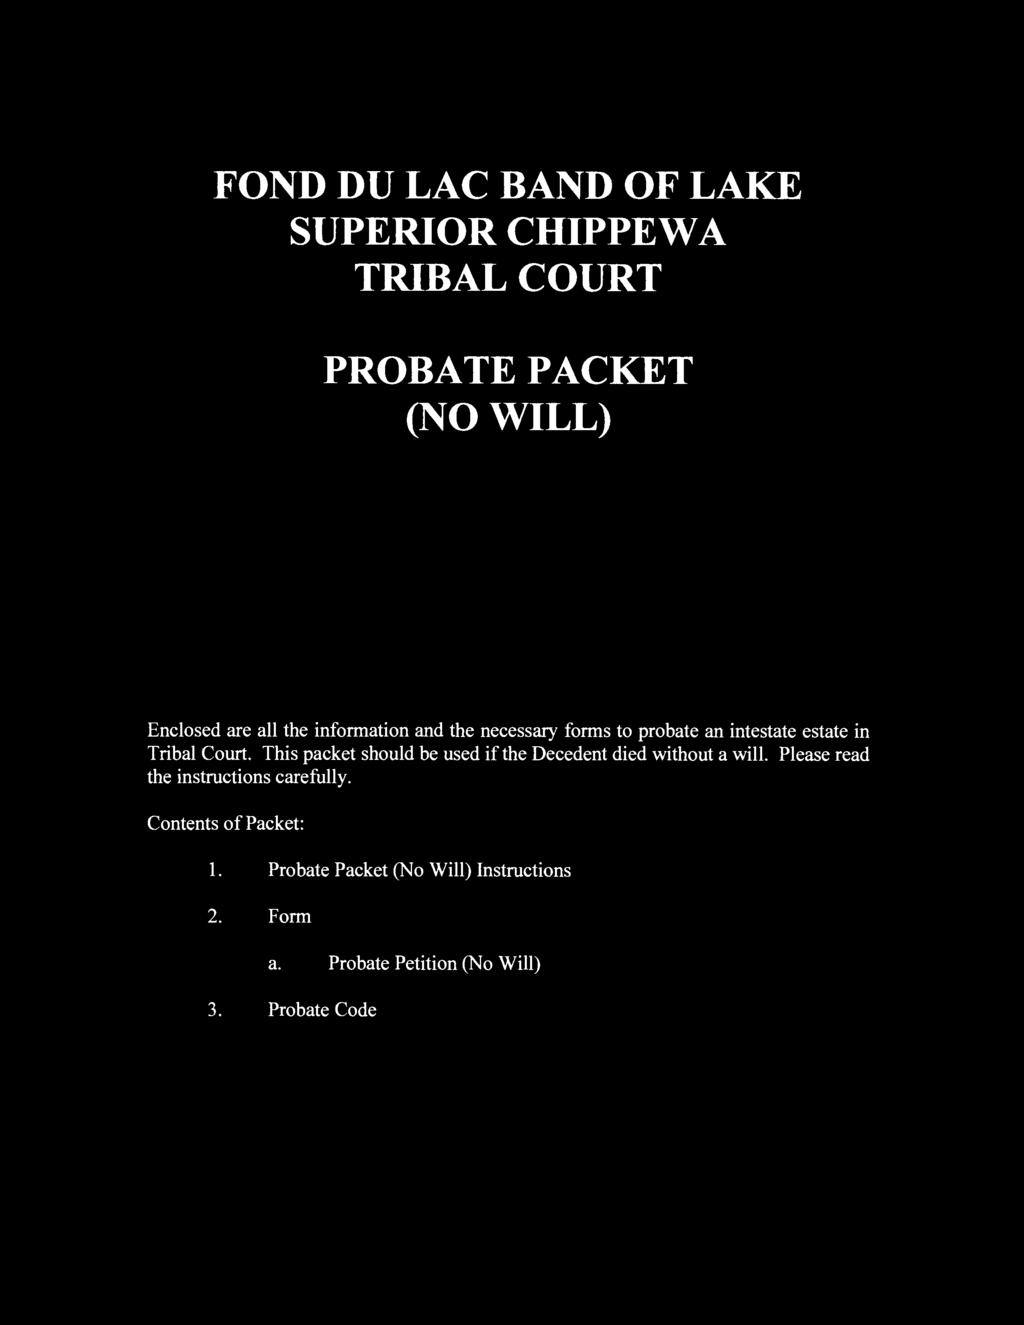 FOND DULAC BAND OF LAKE SUPERIOR CHIPPEWA TRIBAL COURT PROBATE PACKET (NO WILL) Enclosed are all the